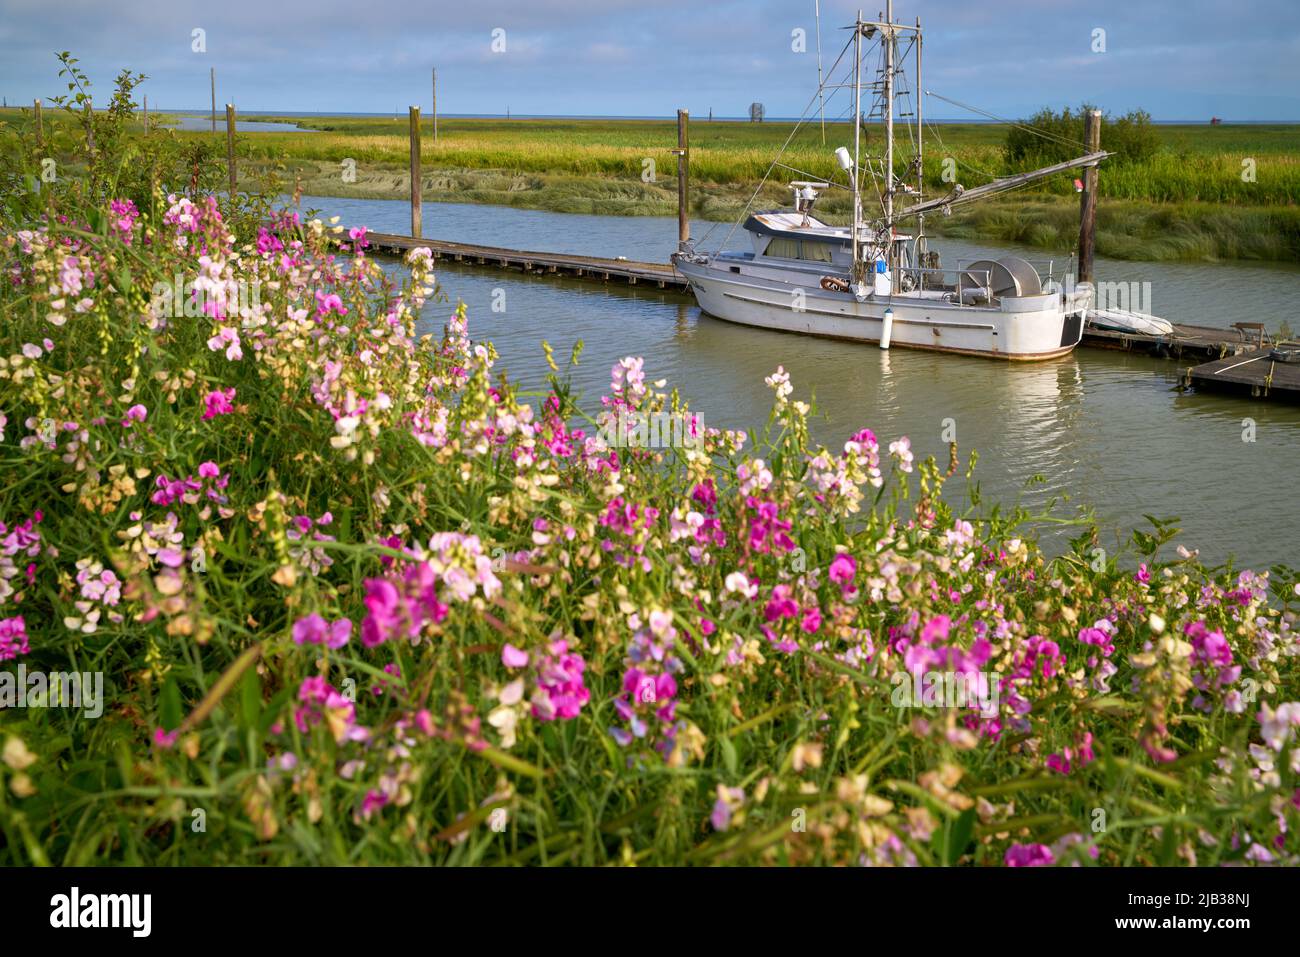 Gillnetter and Scotch Pond Spring Flowers. Garry Point spring flowers frame a gillnetter tied to the dock. Steveston, British Columbia, Canada. Stock Photo